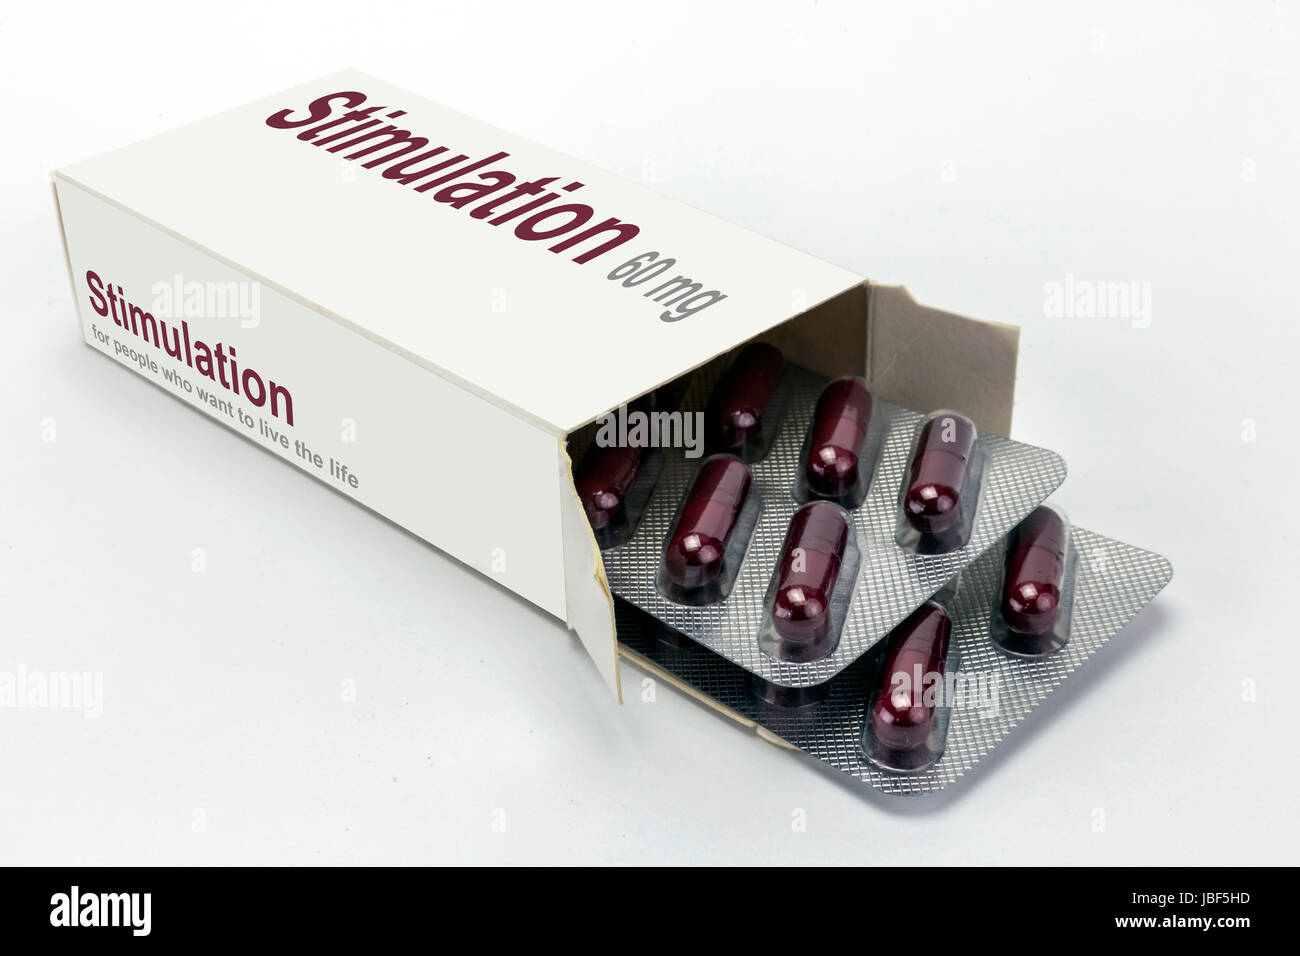 Open medicine packet labelled stimulation opened at one end to display a blister pack of tablets, isolated on white Stock Photo